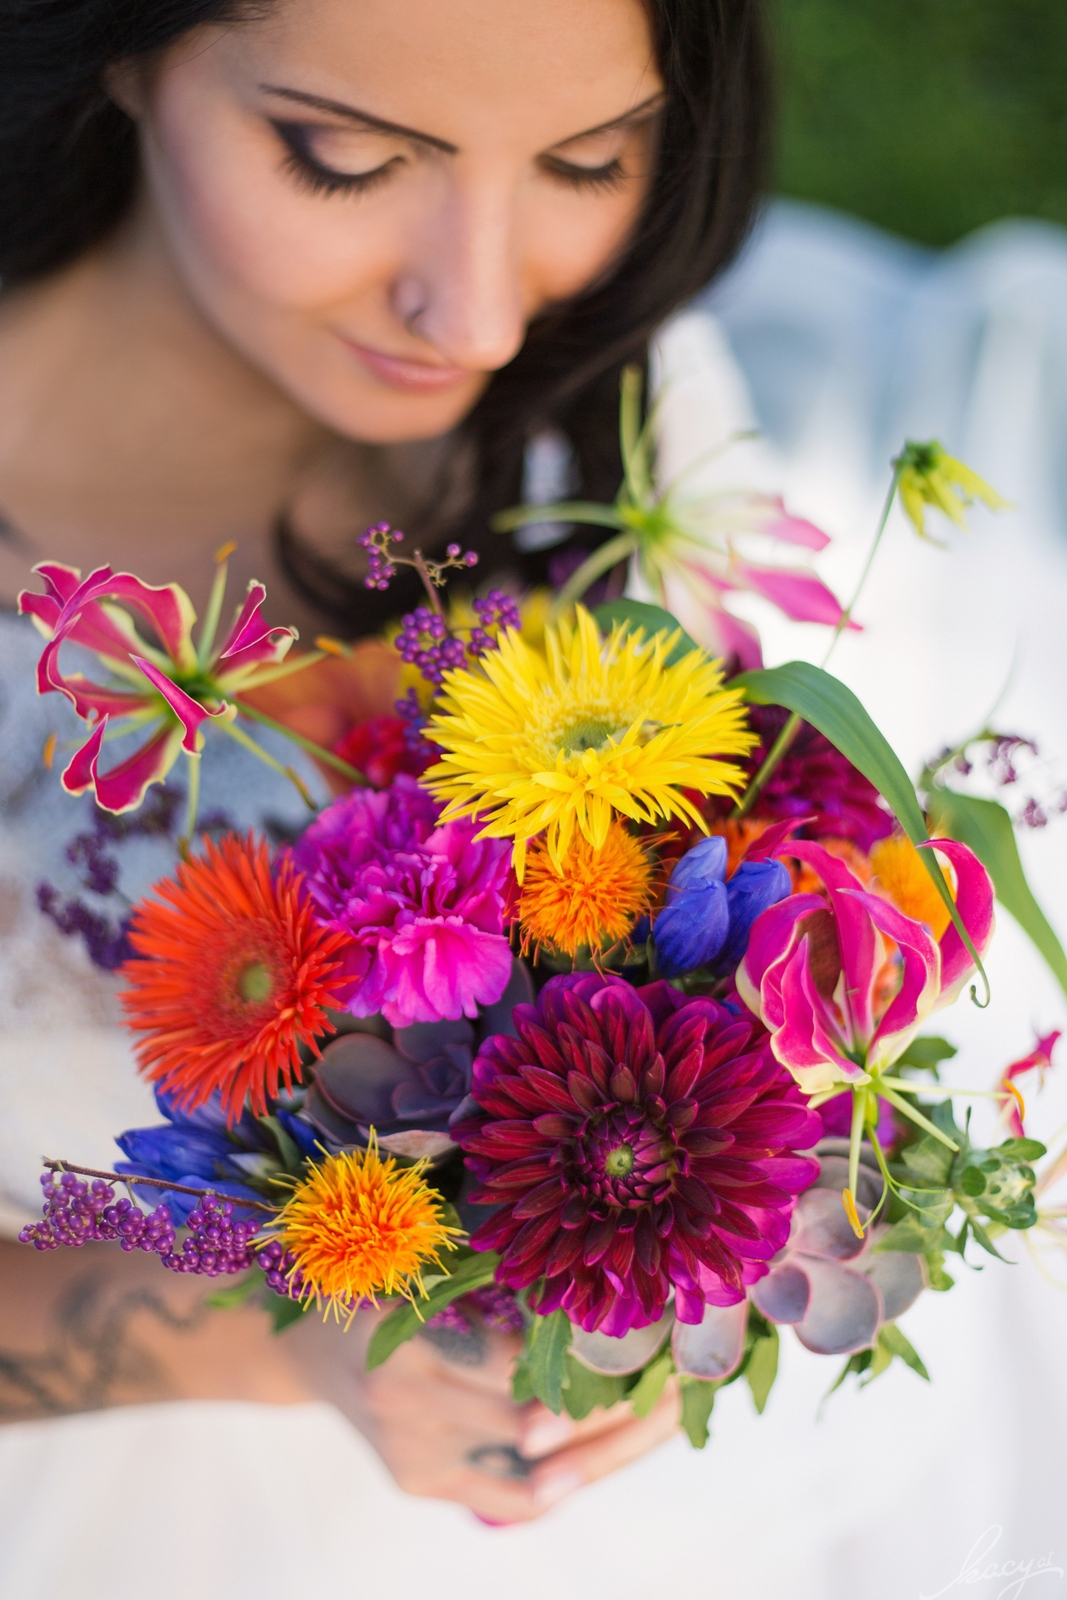 Colourful Wedding Styled Shooting